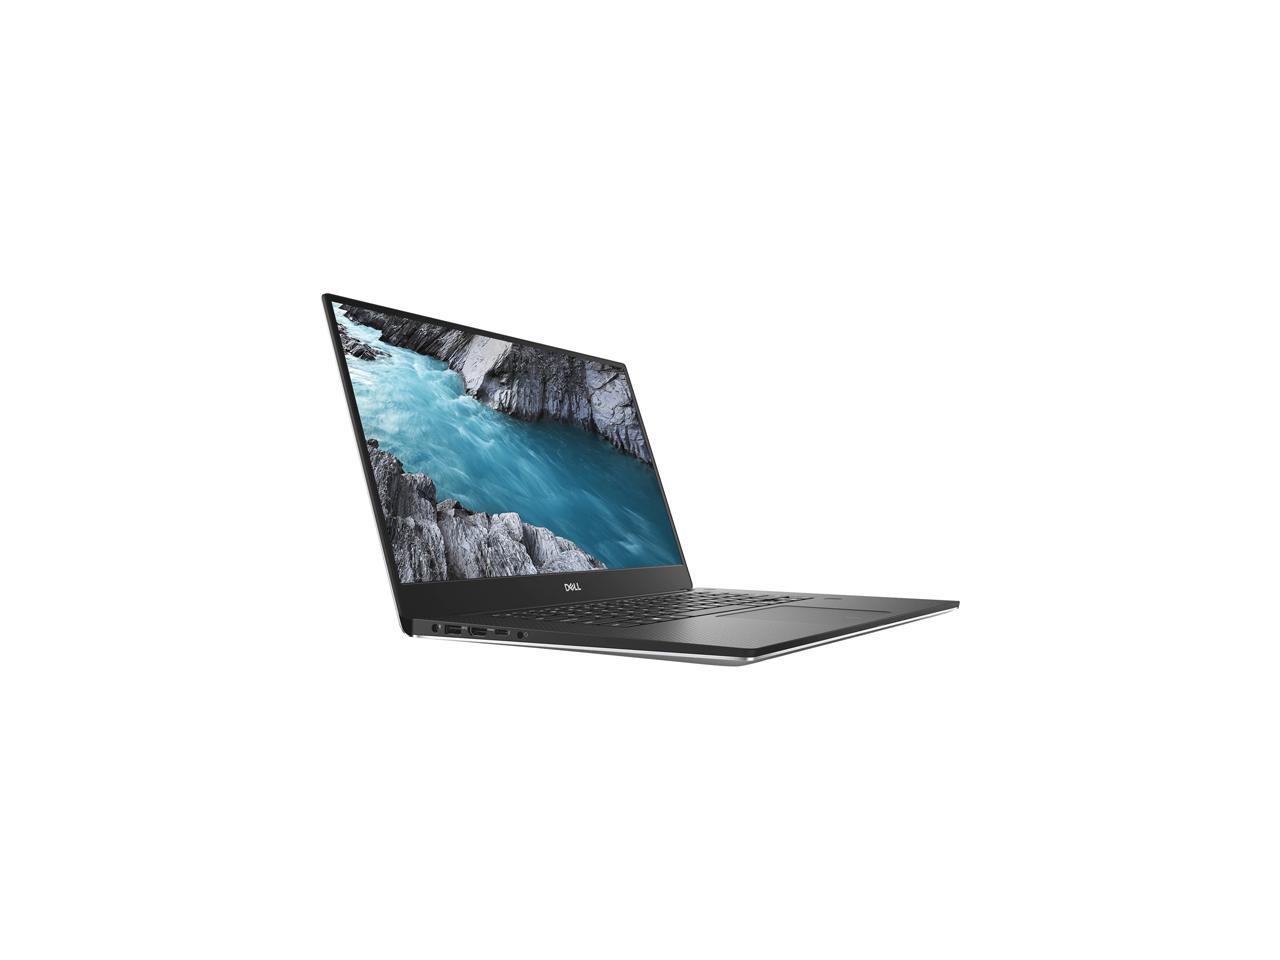 Dell XPS 15 7590 15.6" Touchscreen Notebook - 3840 x 2160 - Core i7 i7-9750H - 32 GB RAM - 1 TB SSD - Silver